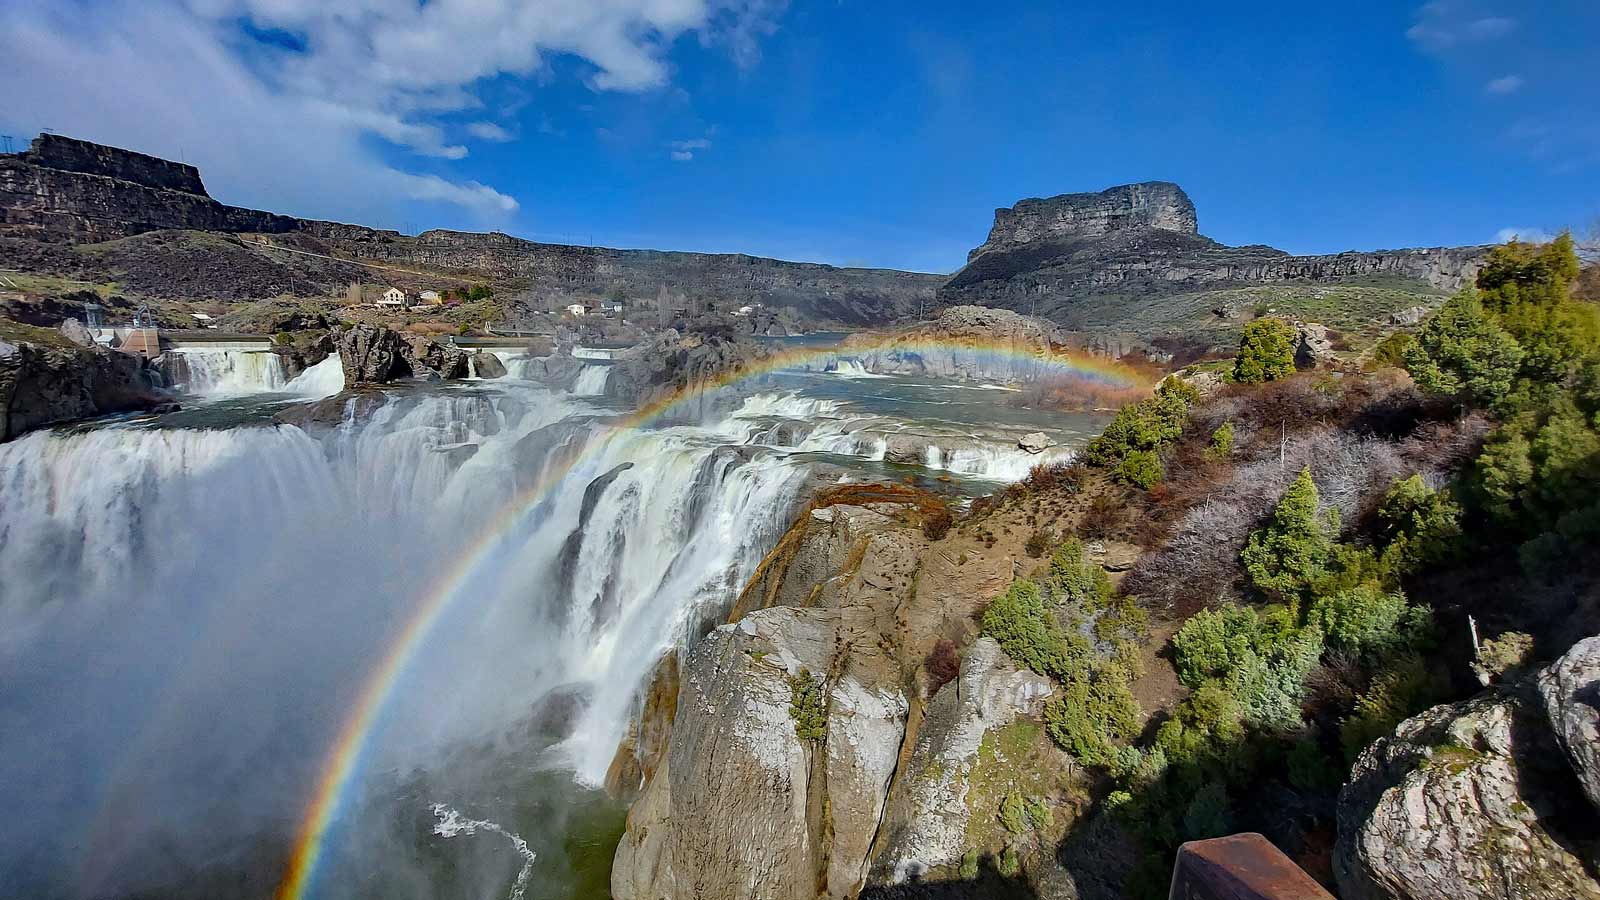 <p><span>Coined the “Niagra of the West,”</span><a href="https://www.tfid.org/309/Shoshone-Falls" rel="nofollow noopener"> <span>Shoshone Falls</span></a><span> receives more than 1.5 million tourists annually, making it the most visited destination in Idaho. Named after the Indigenous people who call that part of the US home, the falls are located on the Snake River as it carves its way through a basalt canyon to the Columbia River. </span></p><p><span>Shoshone Falls is one of the highest natural waterfalls in the United States, surpassing Niagra Falls by 45 feet. Since the early 1900s, citizens have called for the location to be made a national park, but Congress has never approved the proposal. The vehicle fee for the park is $5.00 per car.</span></p>